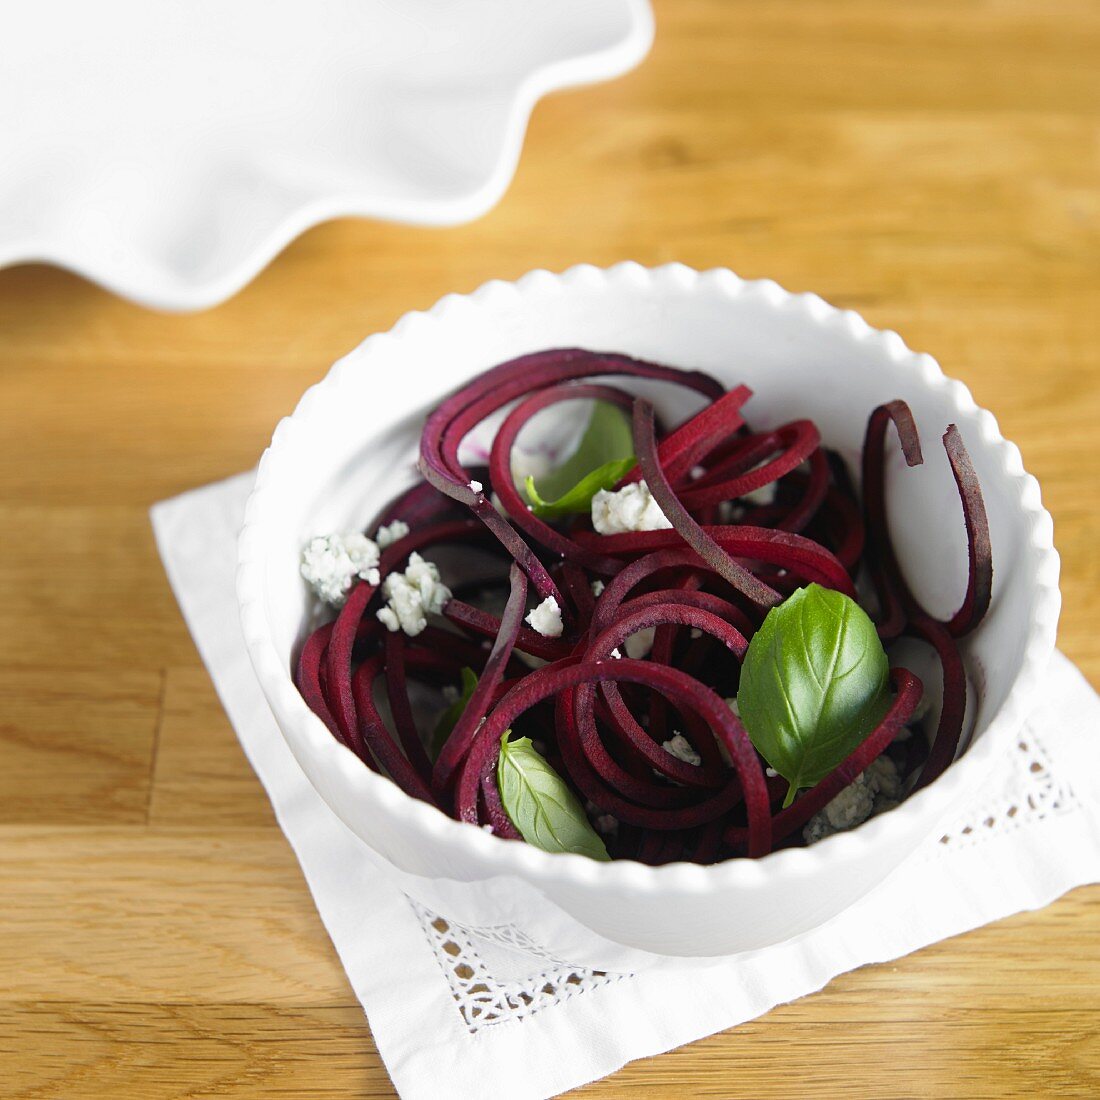 Vegetable spaghetti made from beetroot with Gorgonzola and basil in a white bowl